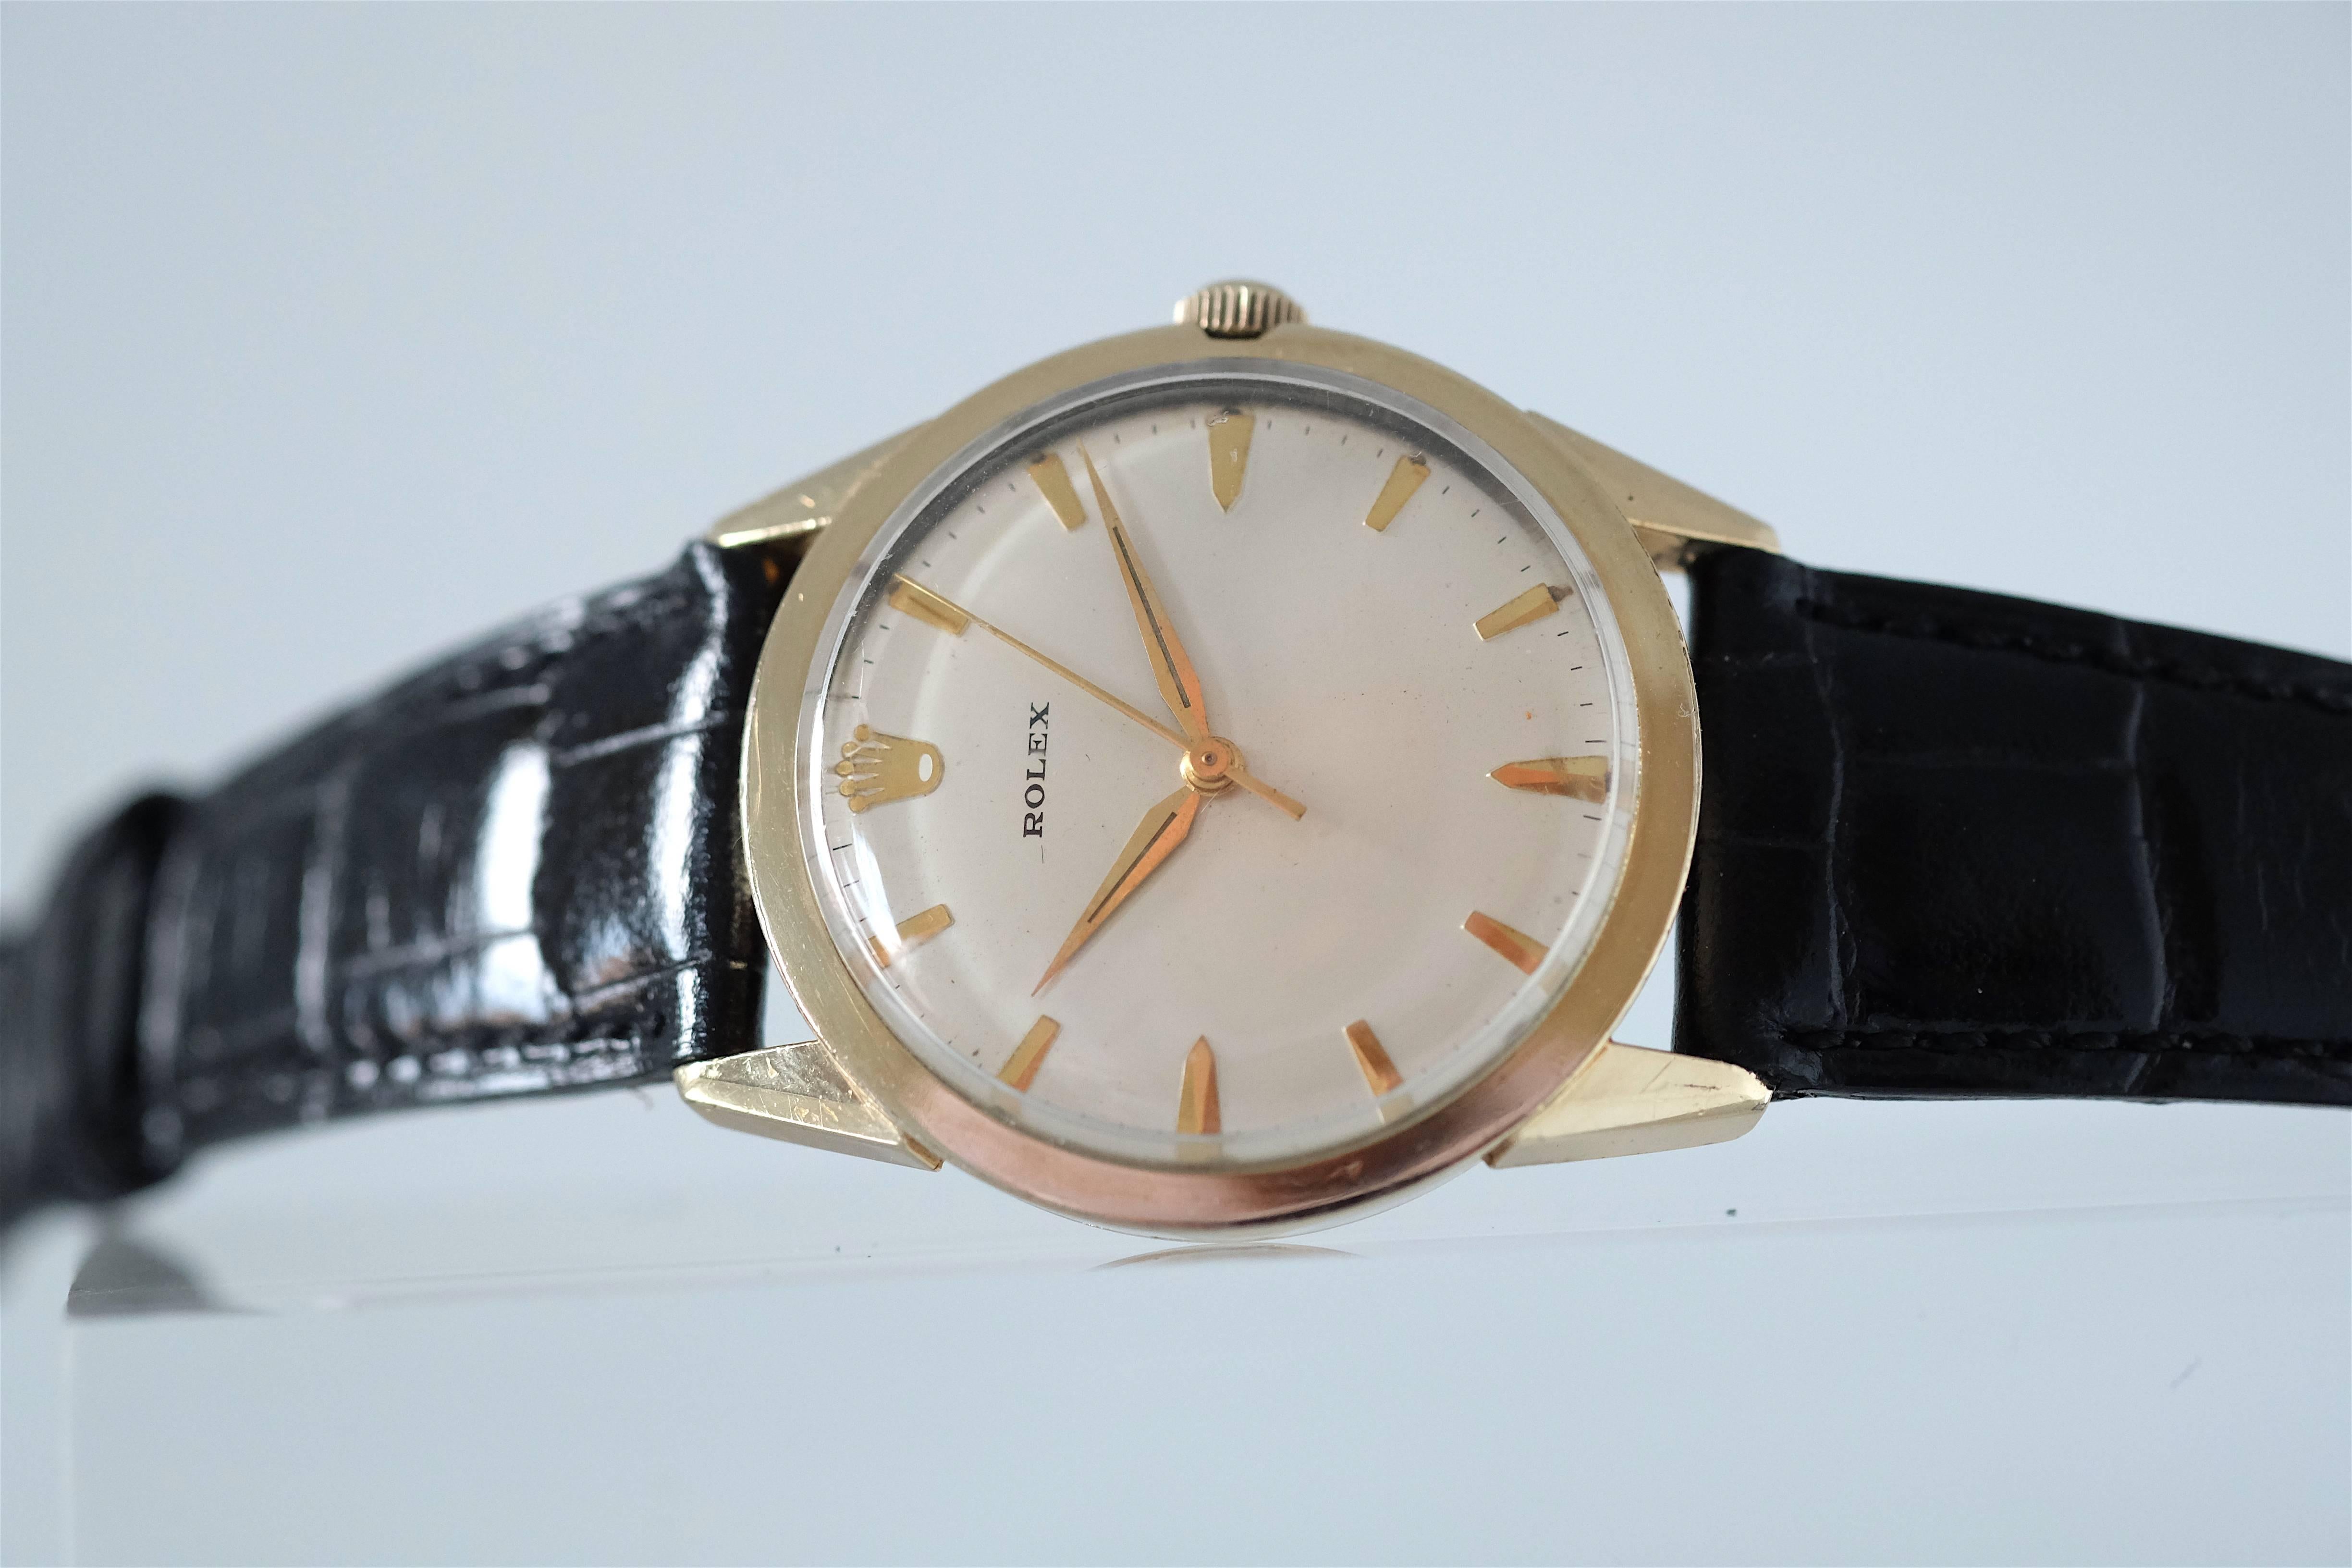 Rolex, automatic, fitted with calibre 1520. Gold Filled Circa 1960's

Case. Three-body, 14kt gold filled polished and brushed, with snap back case. Case show some aging with knife marks one one side.

Dial. Original dial cream color .